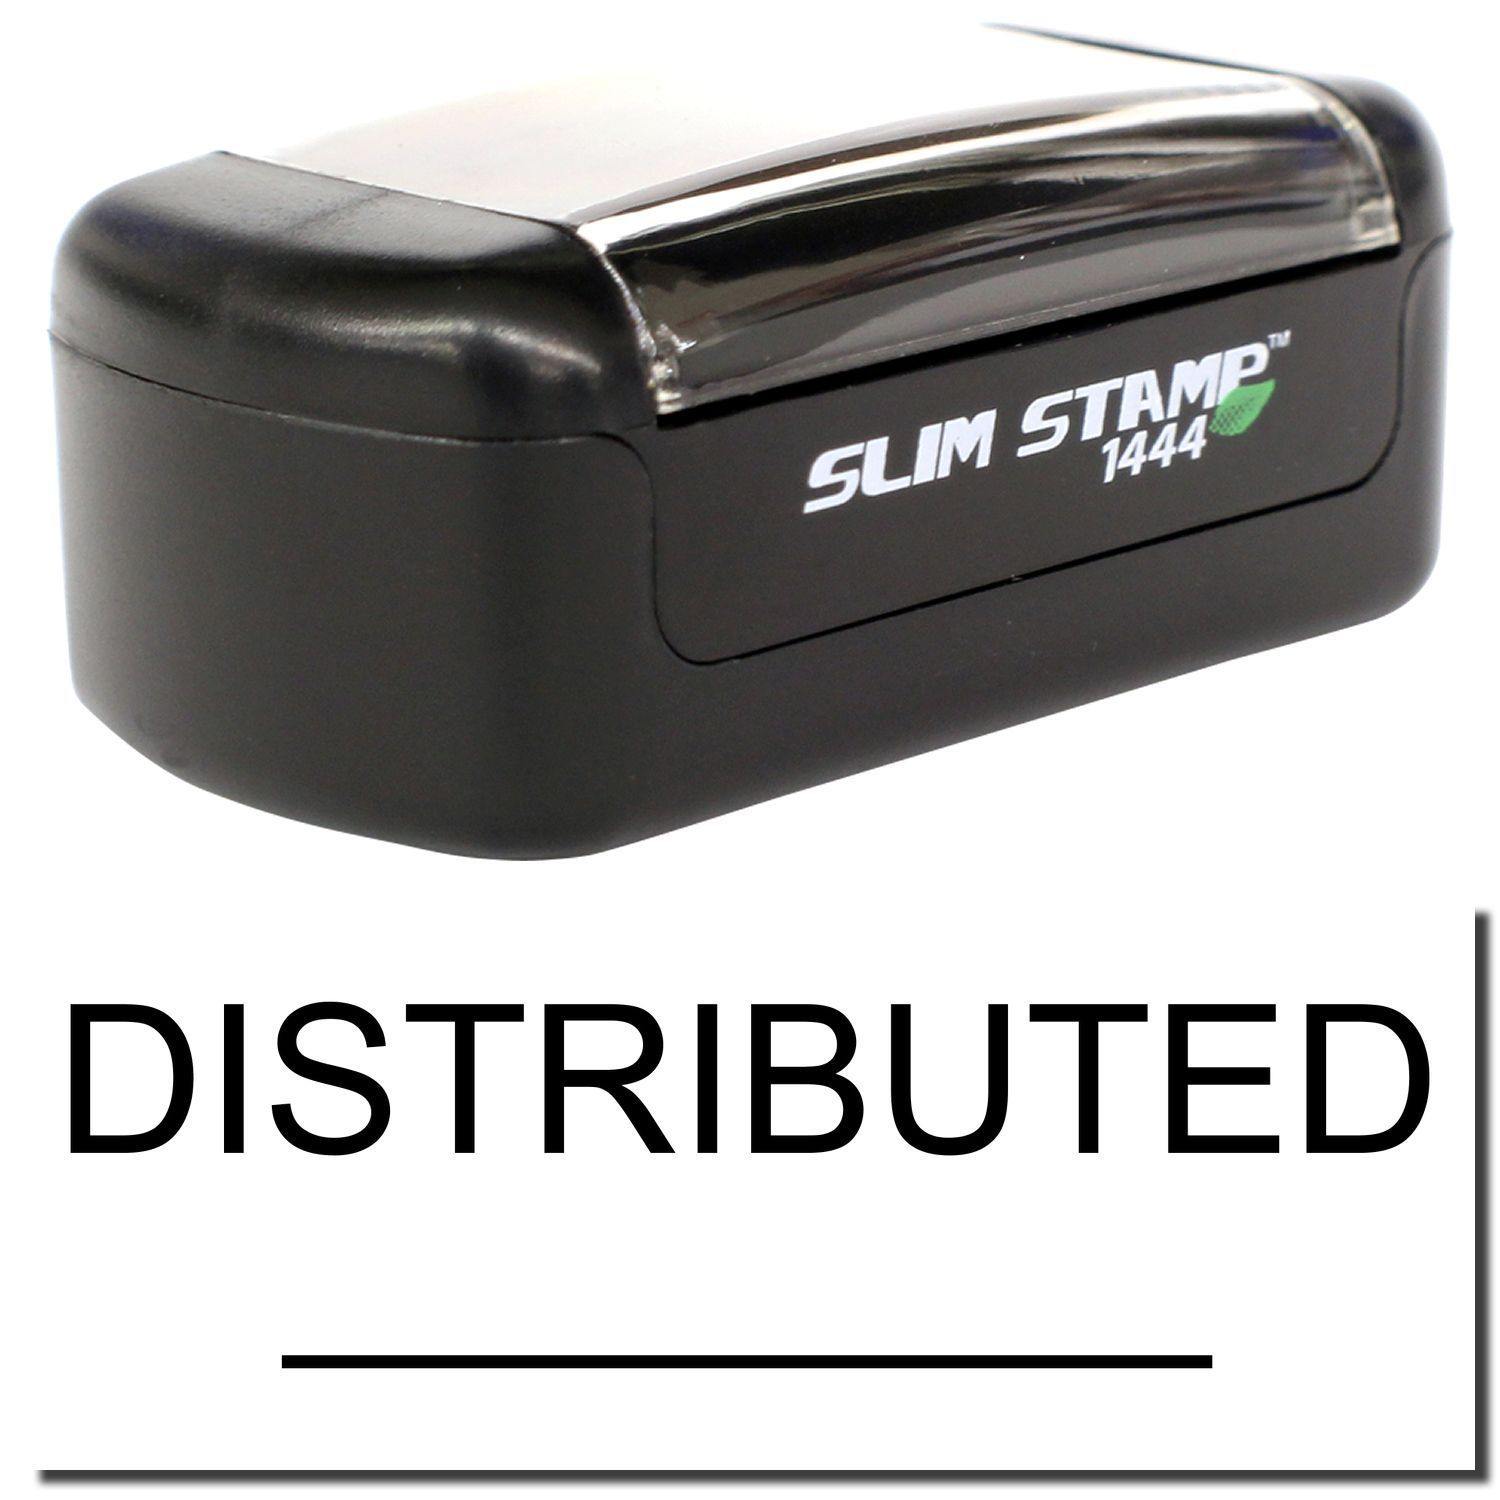 A stock office pre-inked stamp with a stamped image showing how the text "DISTRIBUTED" with a line underneath the text is displayed after stamping.